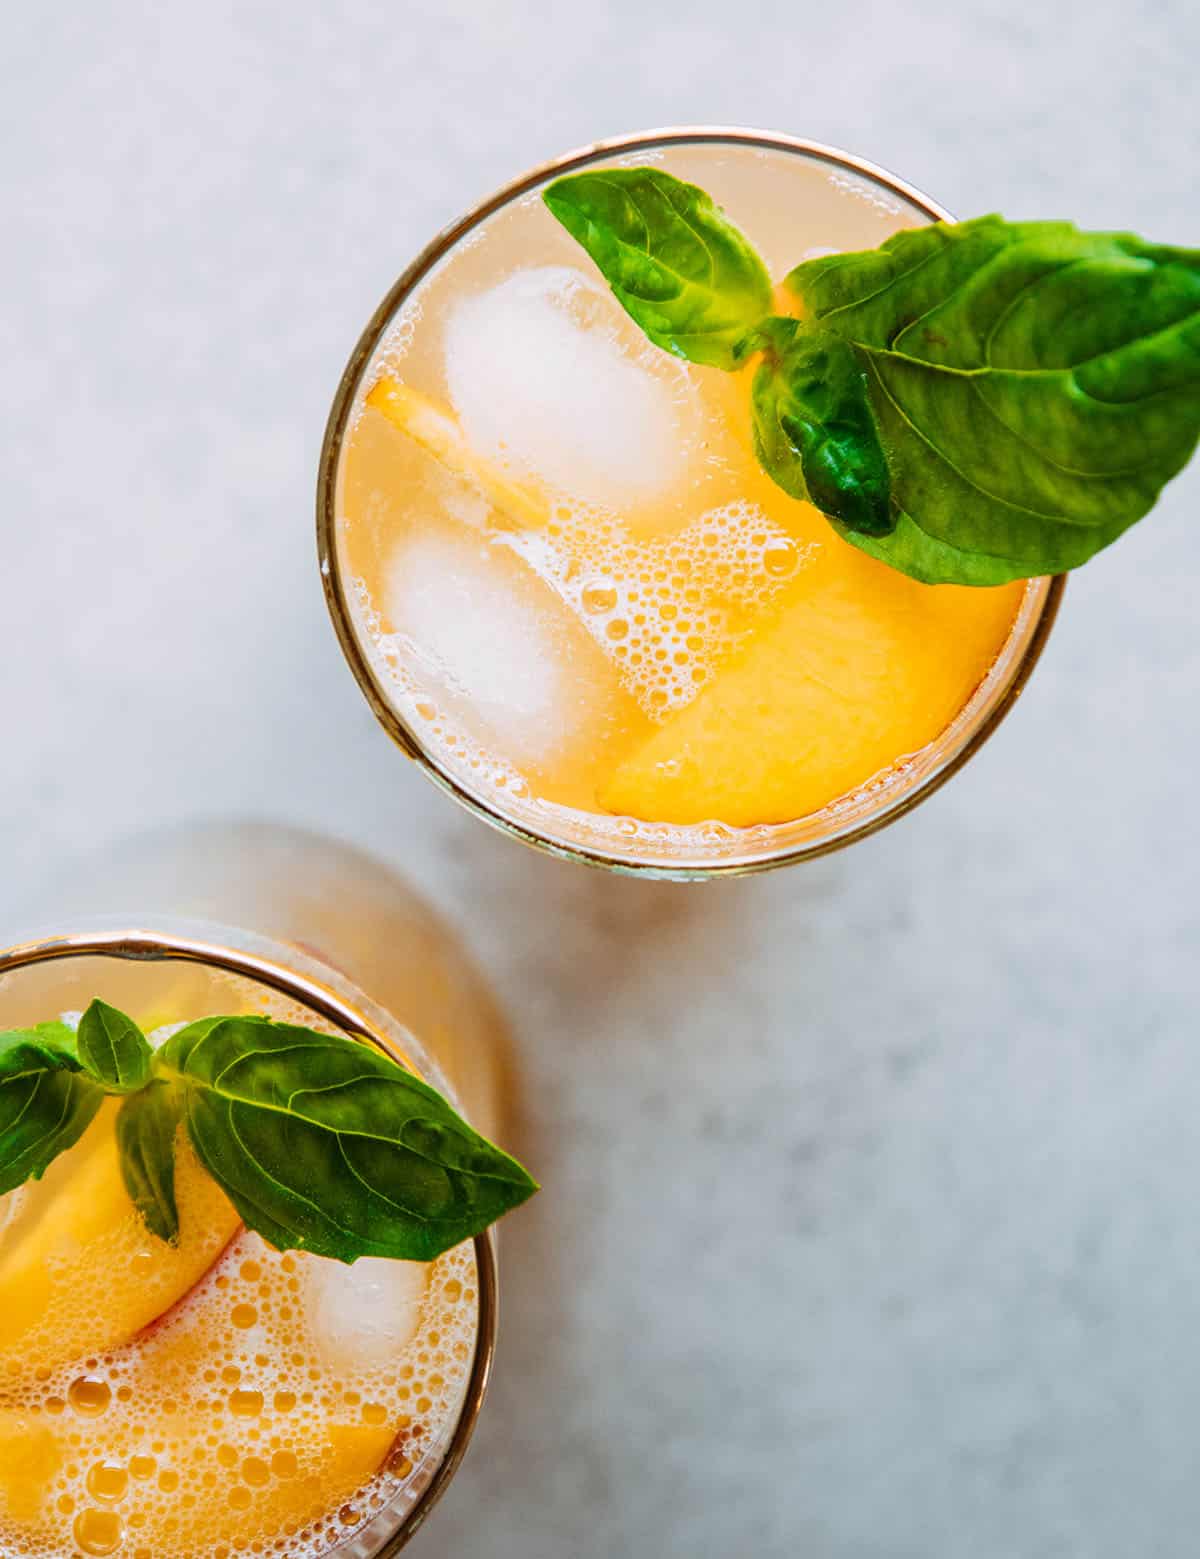 Peach cocktail in a gold-rimmed glass with sliced peaches and basil garnish.